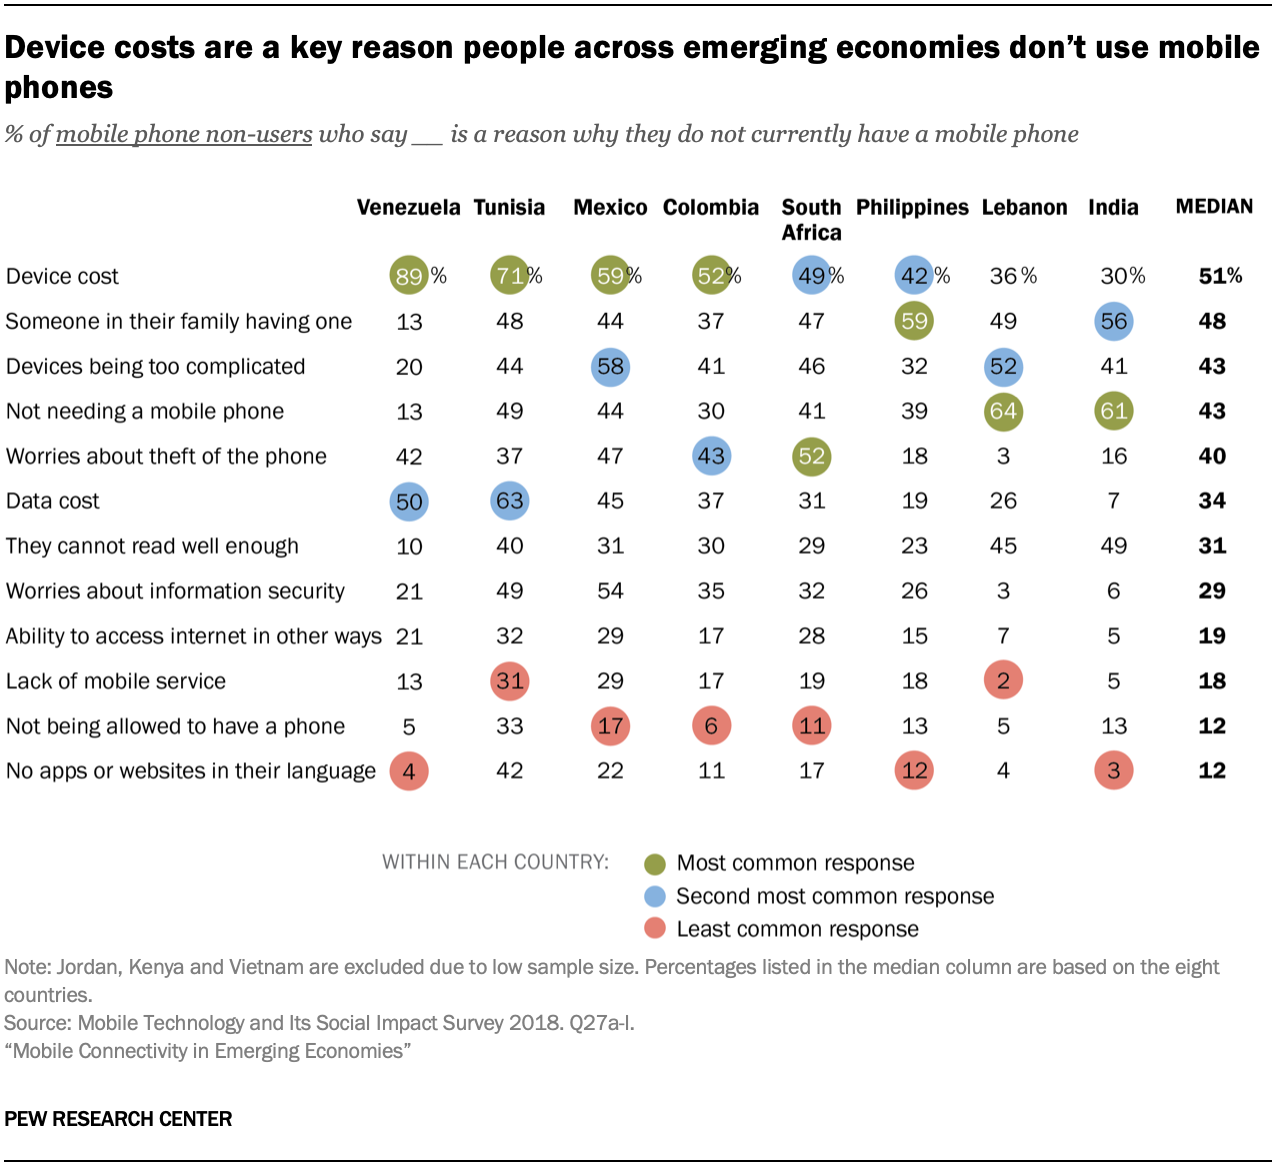 Device costs are a key reason people across emerging economies don’t use mobile phones